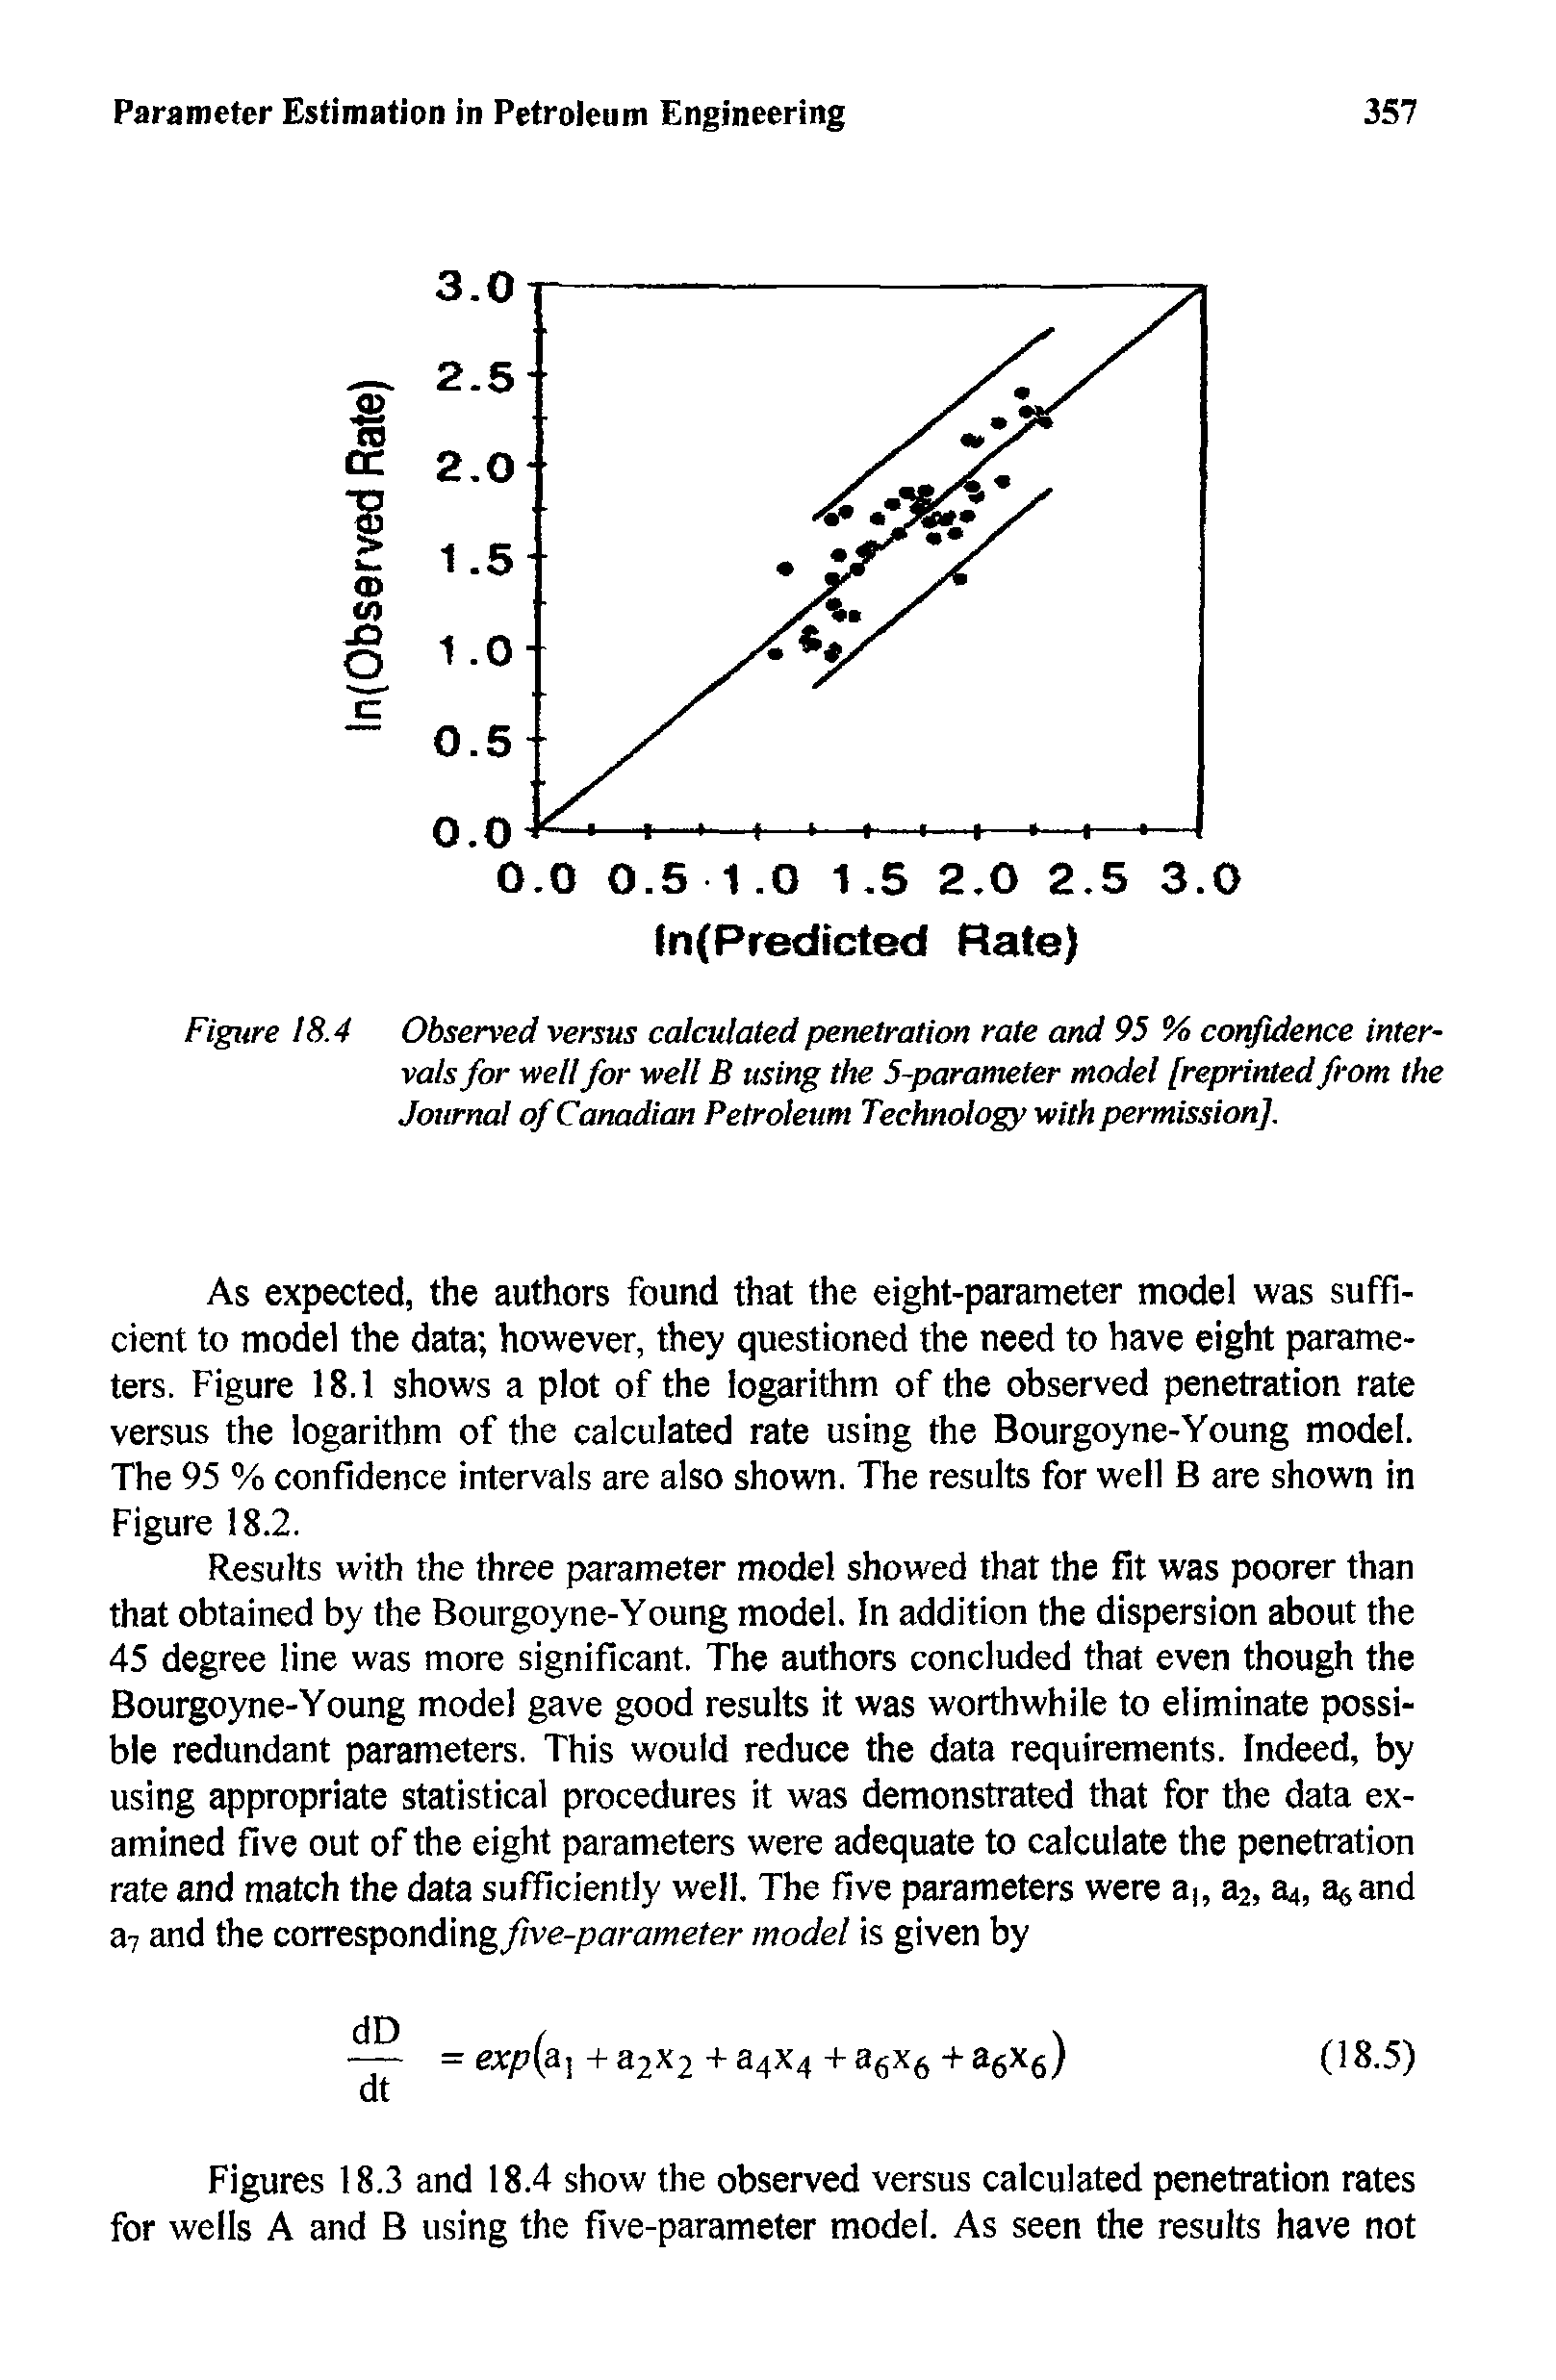 Figure 18.4 Observed versus calculated penetration rate and 95 % confidence intervals for well for well B using the 5-parameter model [reprinted from the Journal of Canadian Petroleum Technology with permission].